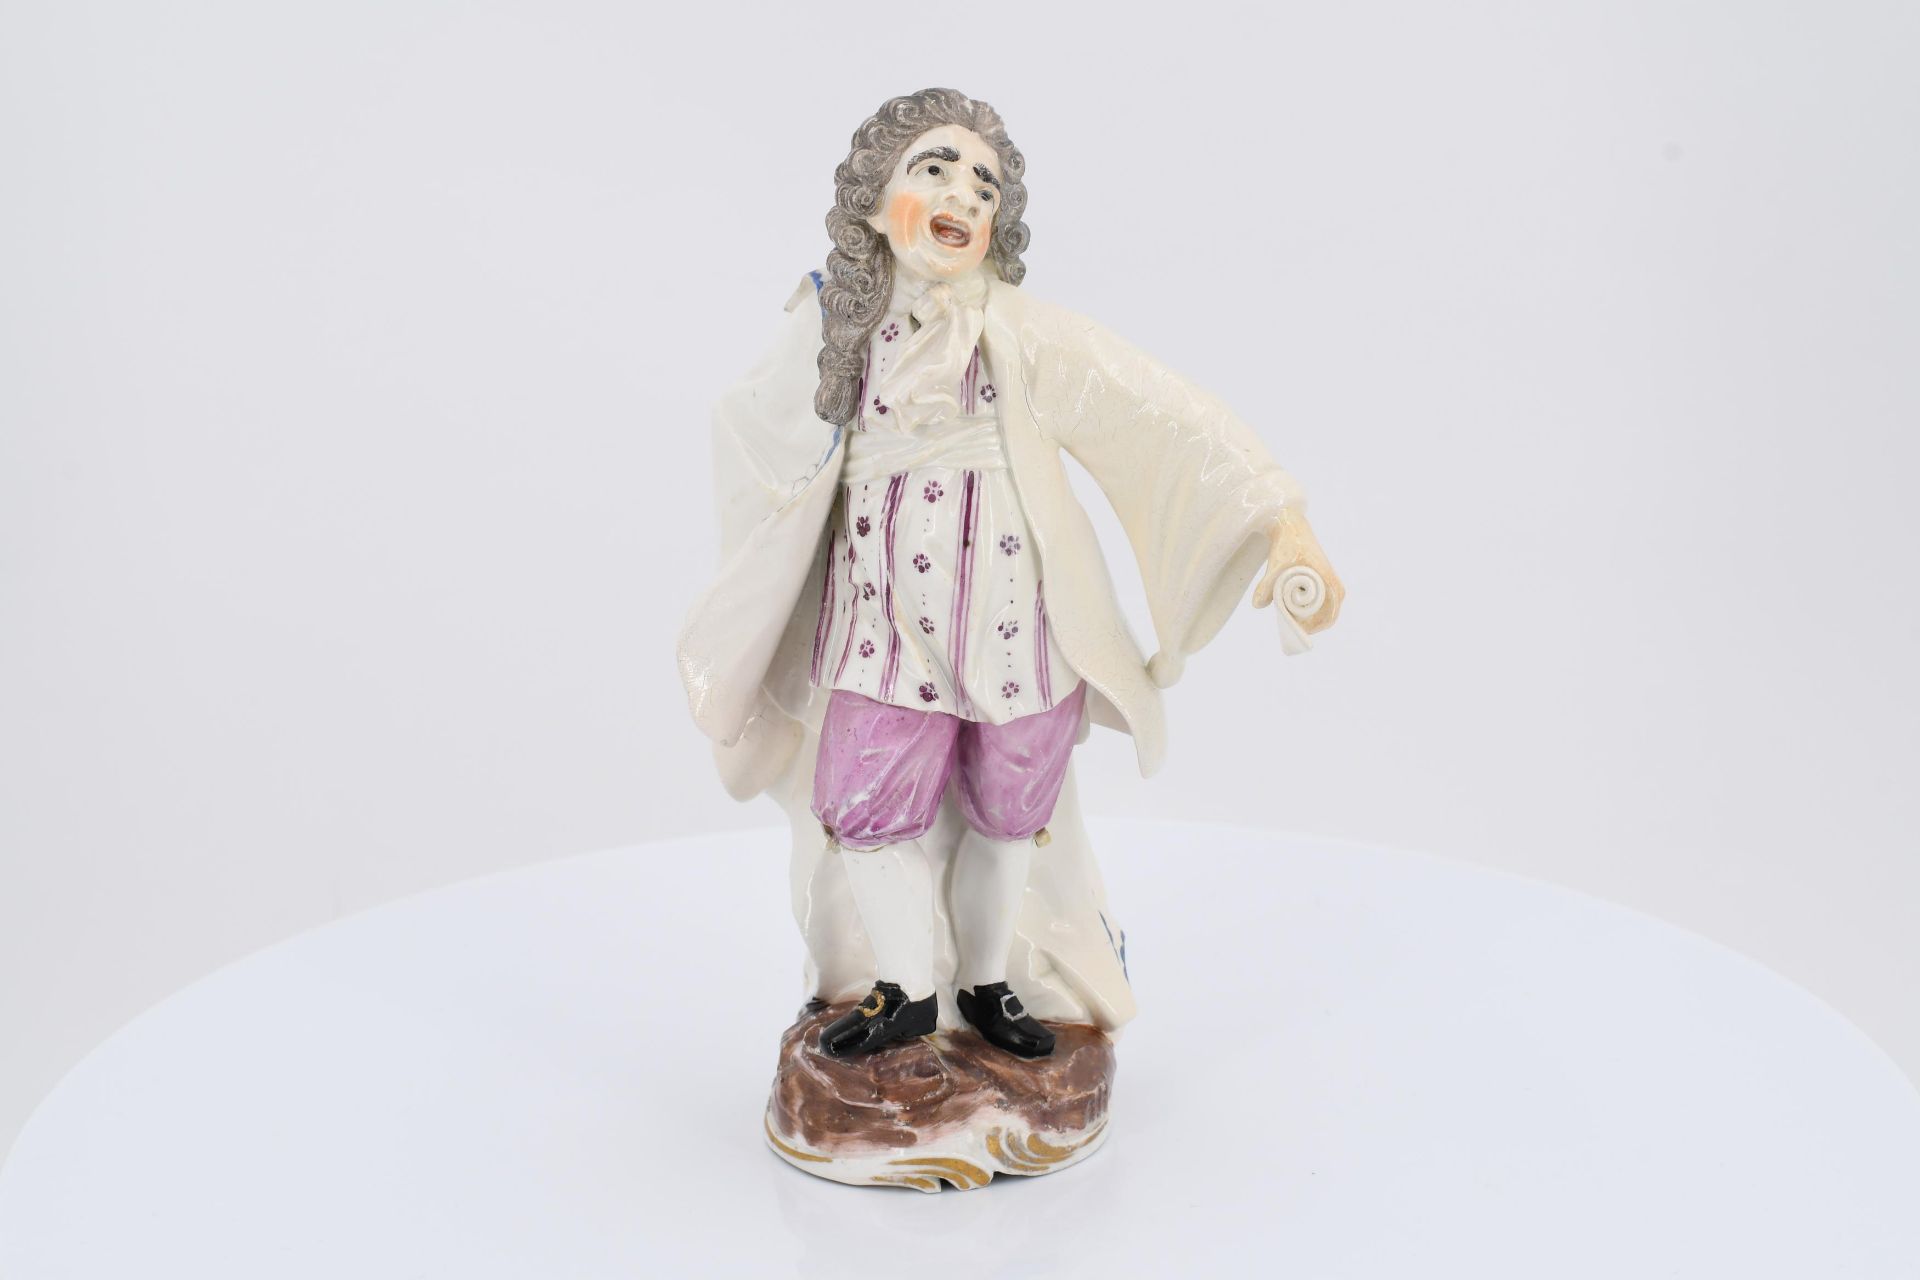 Porcelain figurine of singing capellmeister - Image 2 of 6